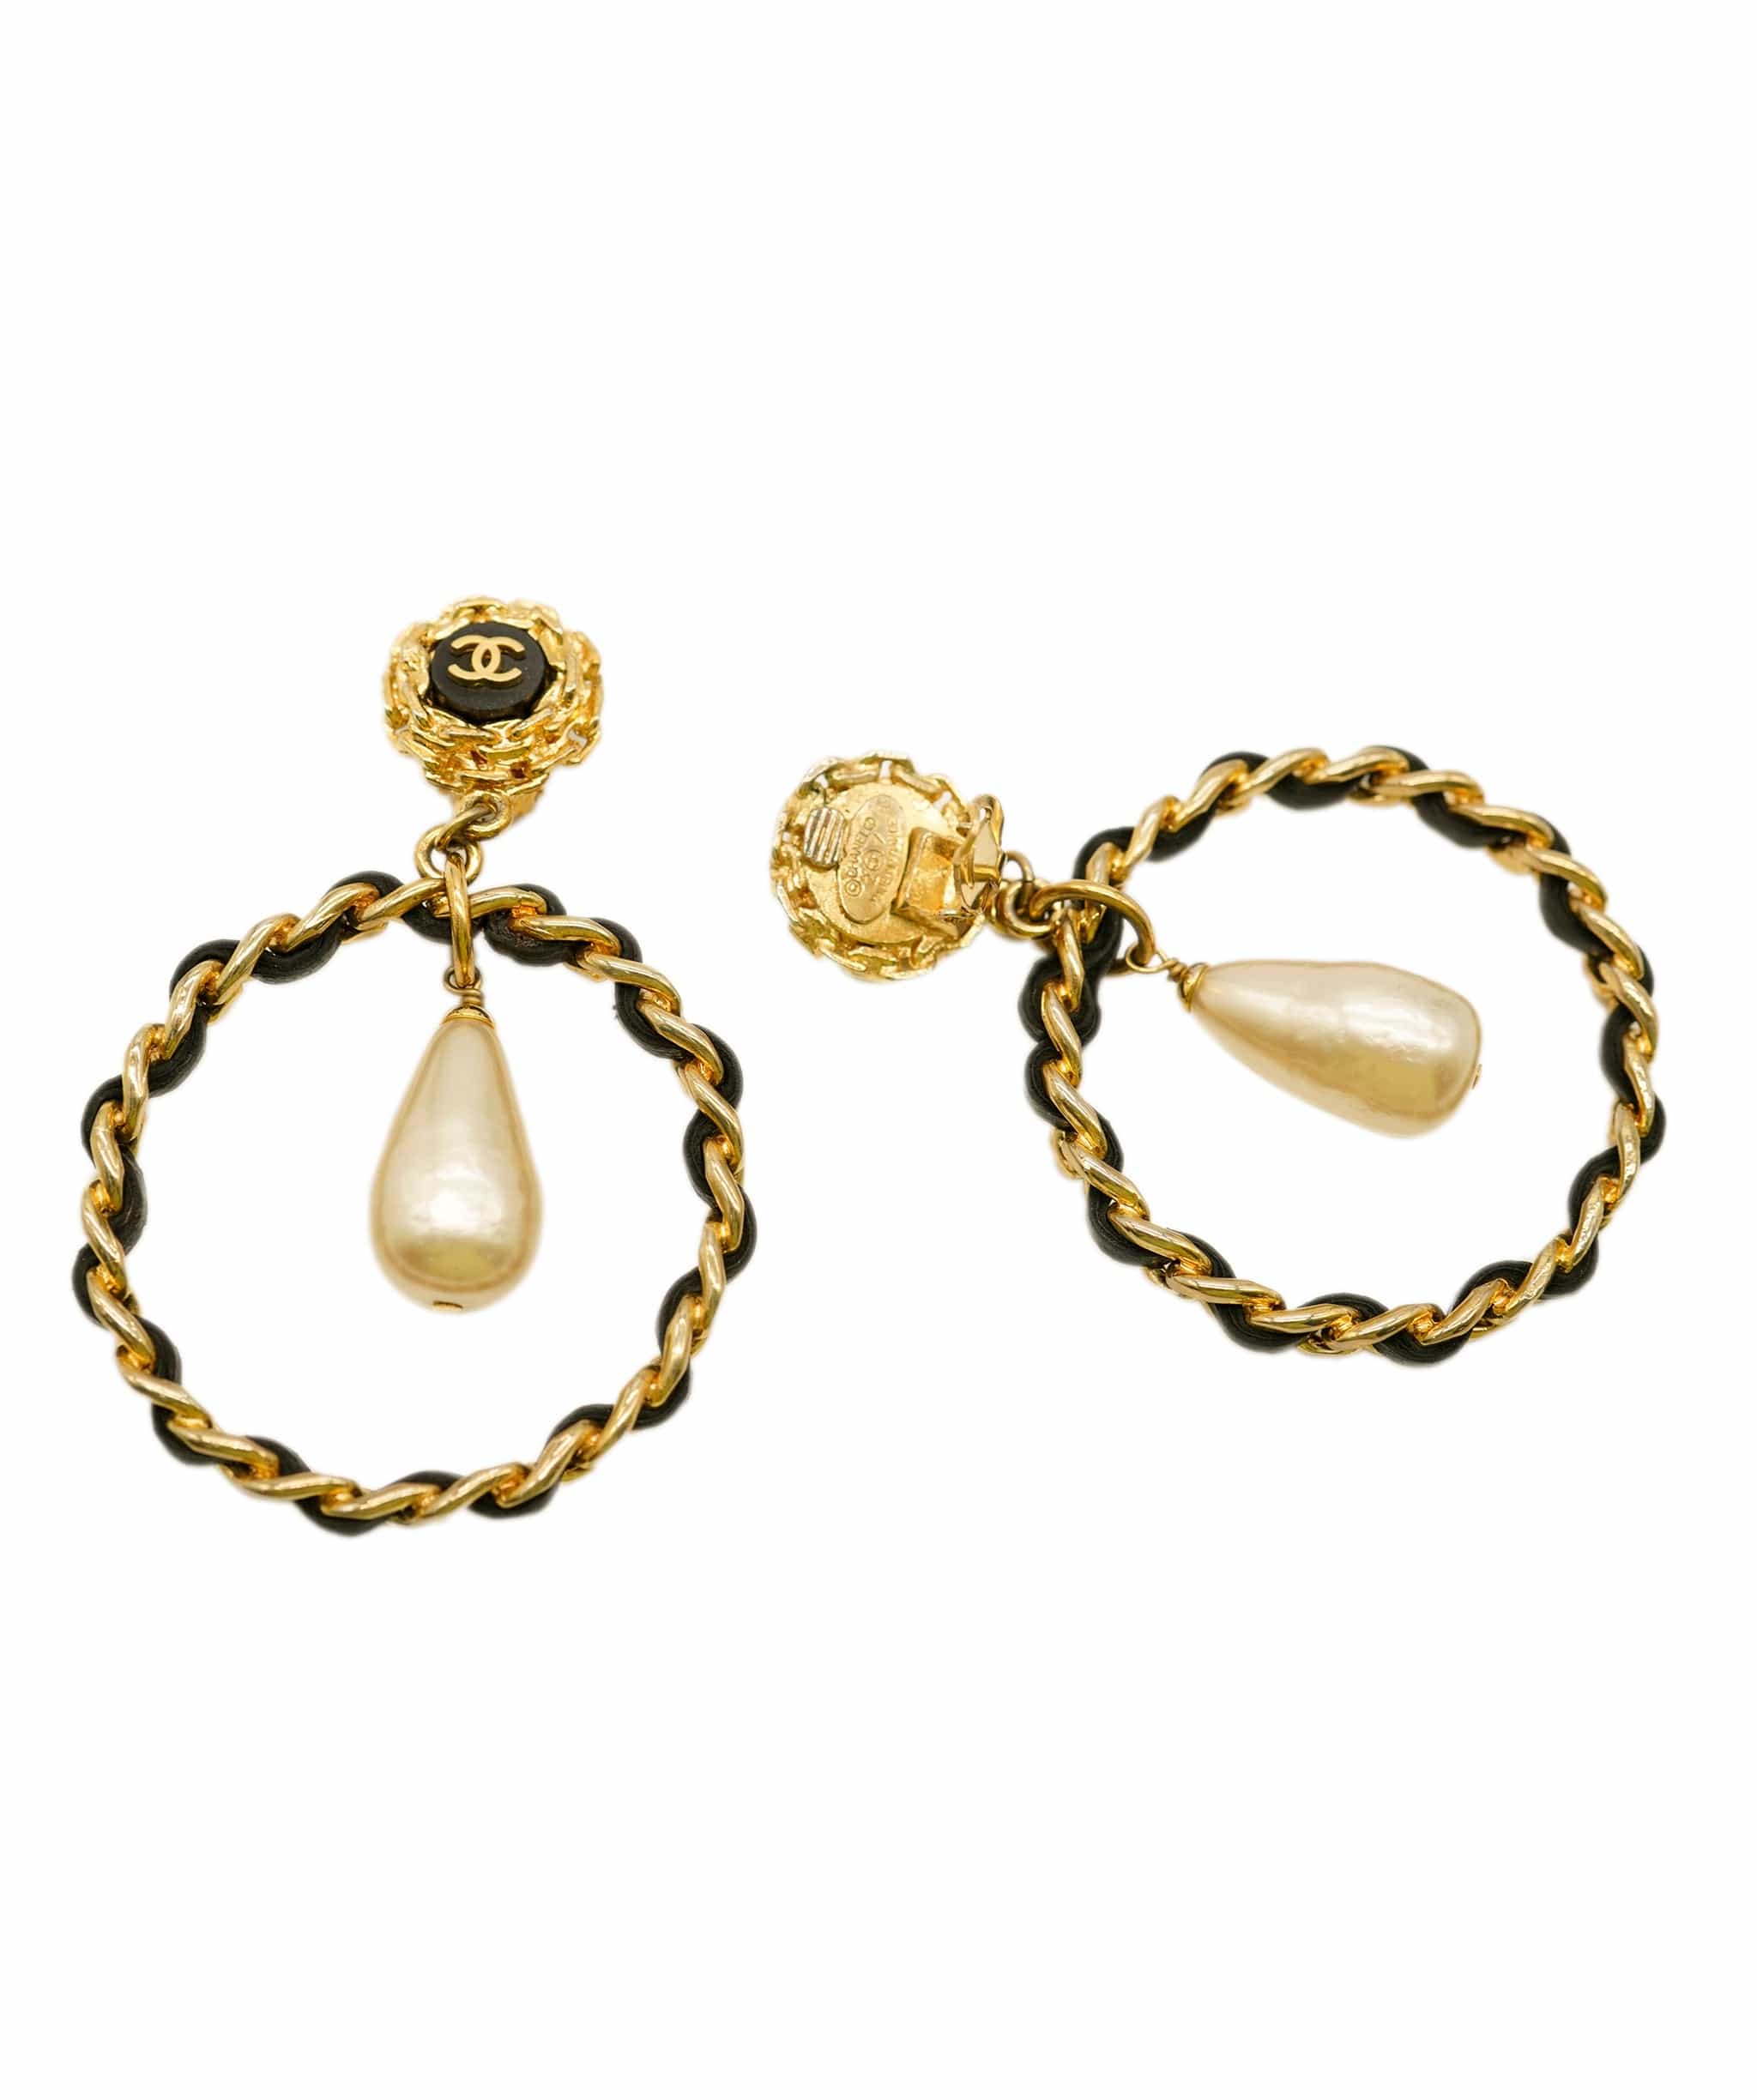 Chanel Vintage Chanel Haute Couture Runway Collection GRIPOIX PEARL Clip On Earrings - ASL2234